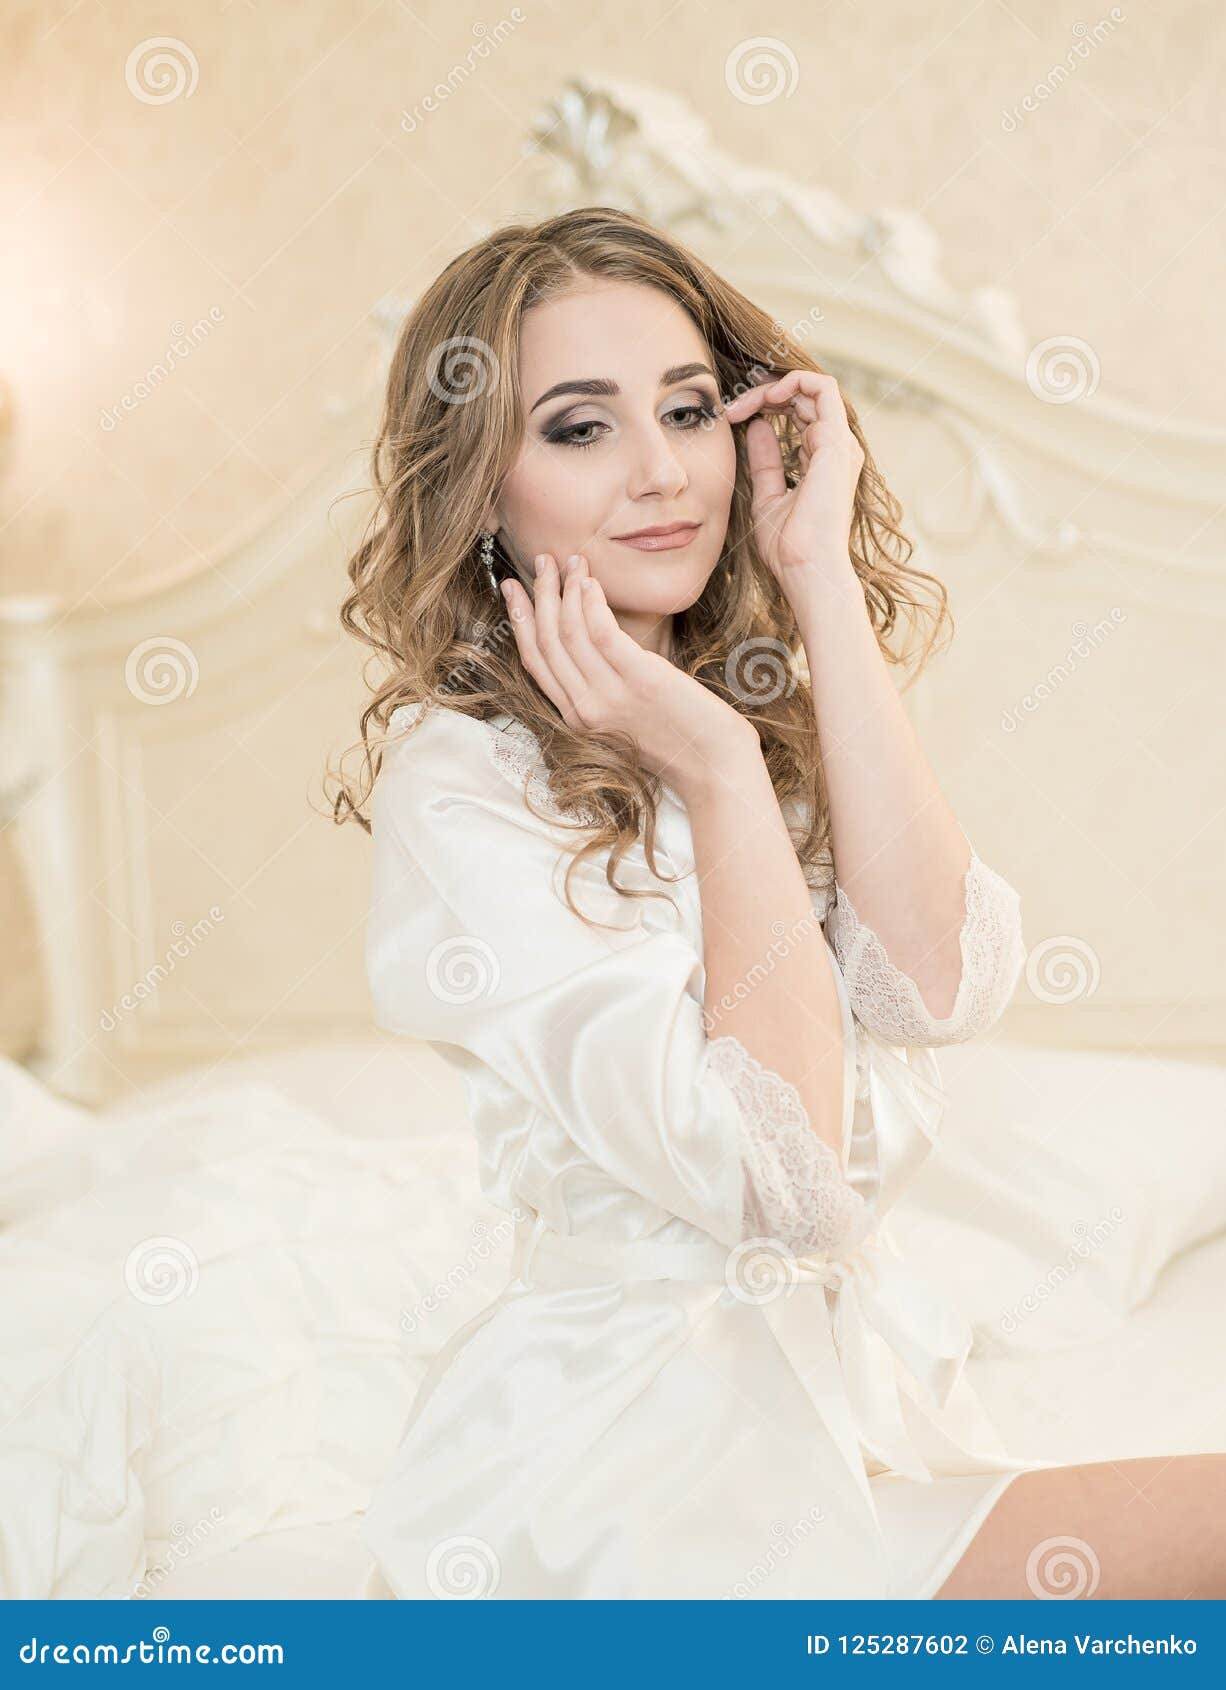 Portrait of a Young Bride in White Lace Boudoir with Wavy Dark Hair ...